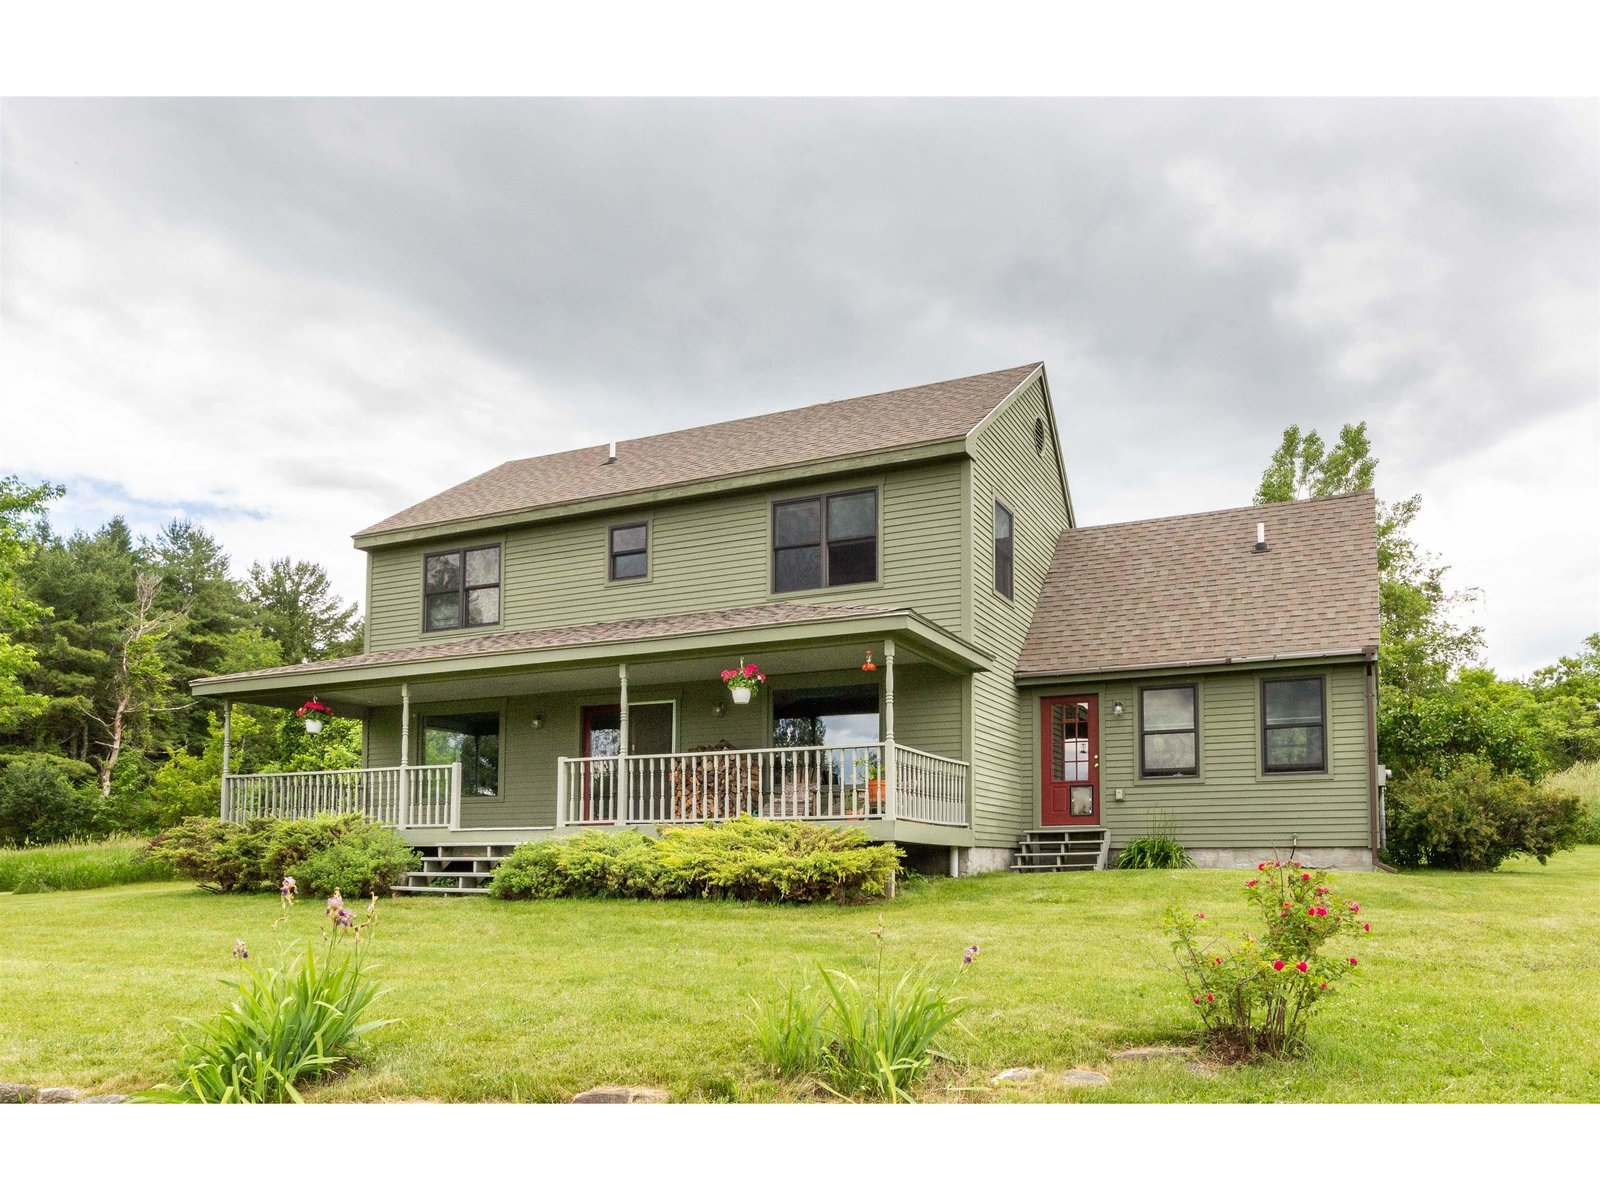 Sold property in North Ferrisburgh